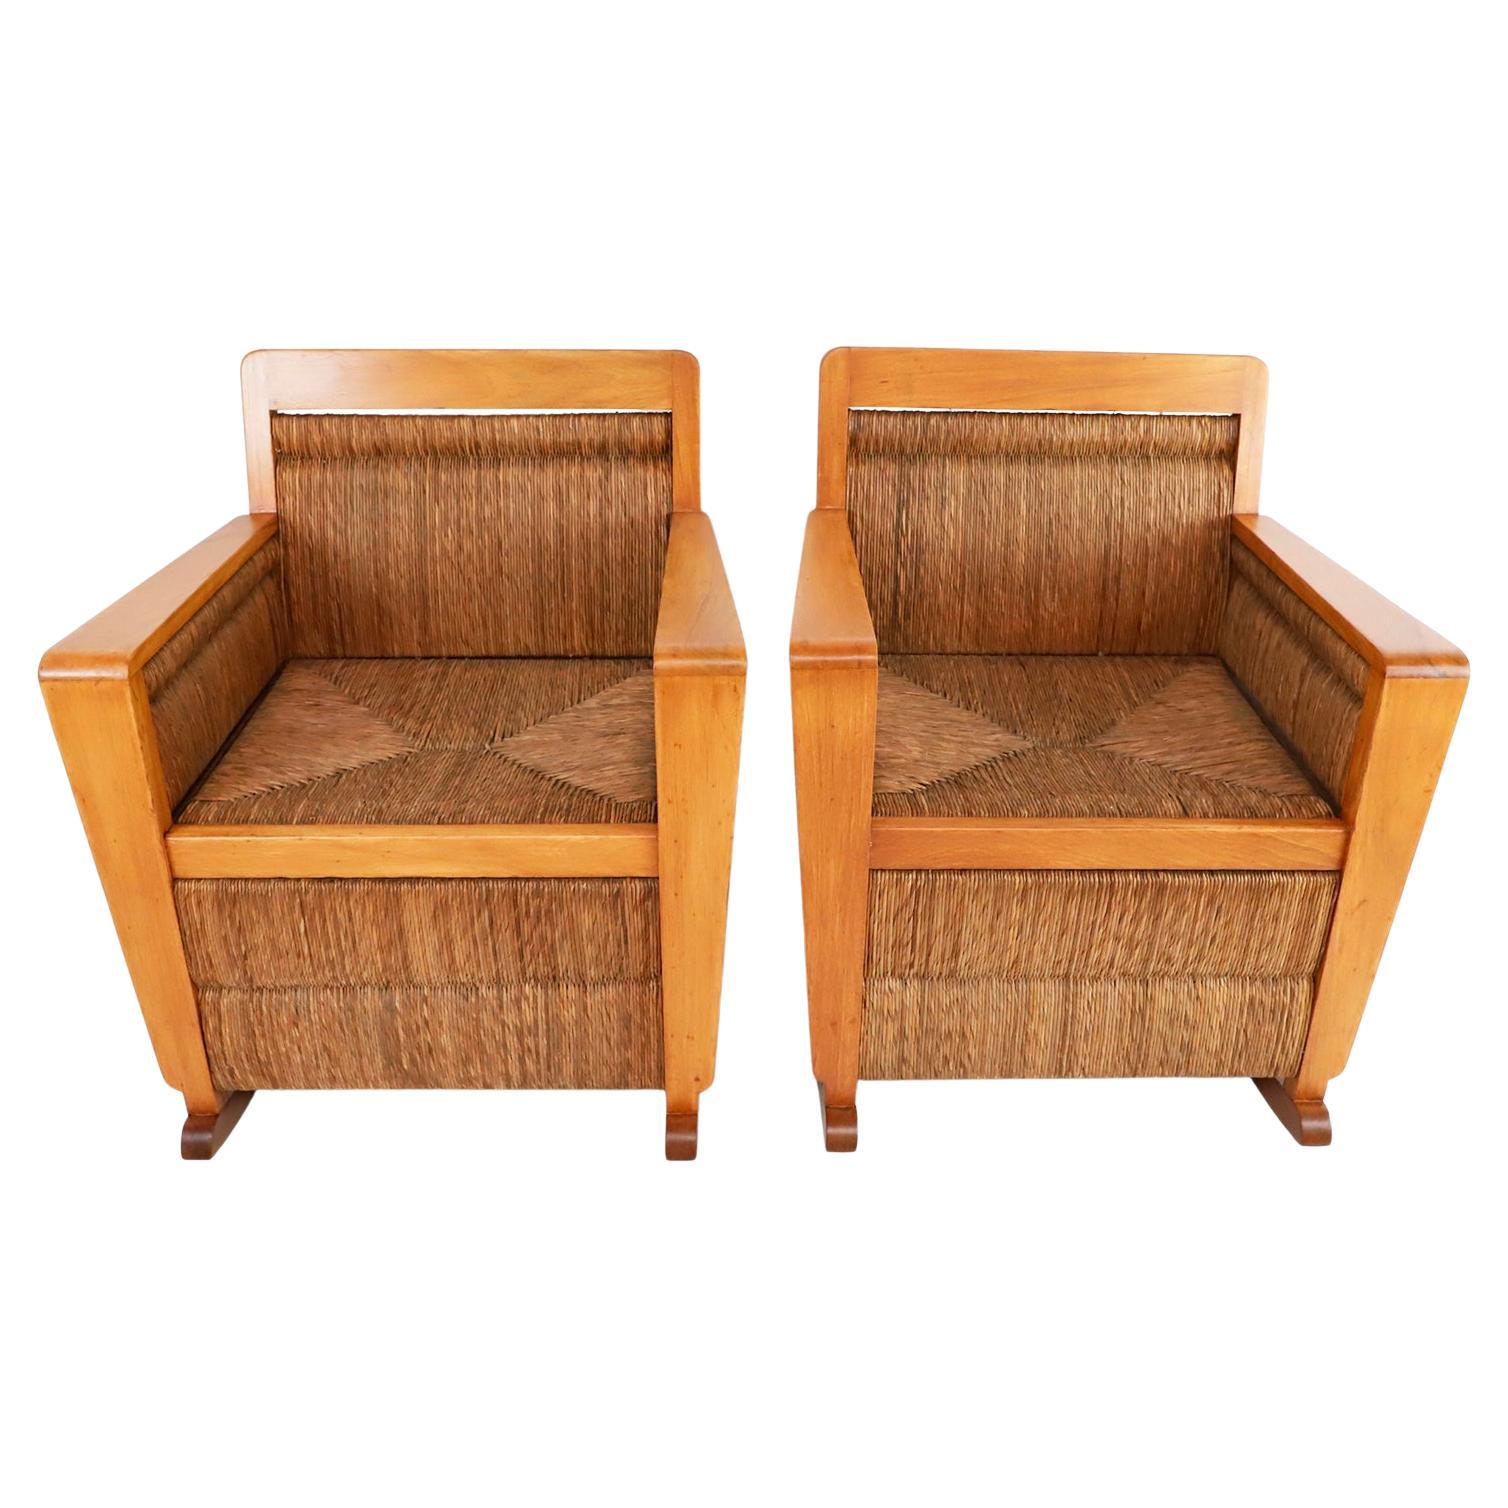 Pair of Mexican Mid-Century Modern Woven Rockingchairs